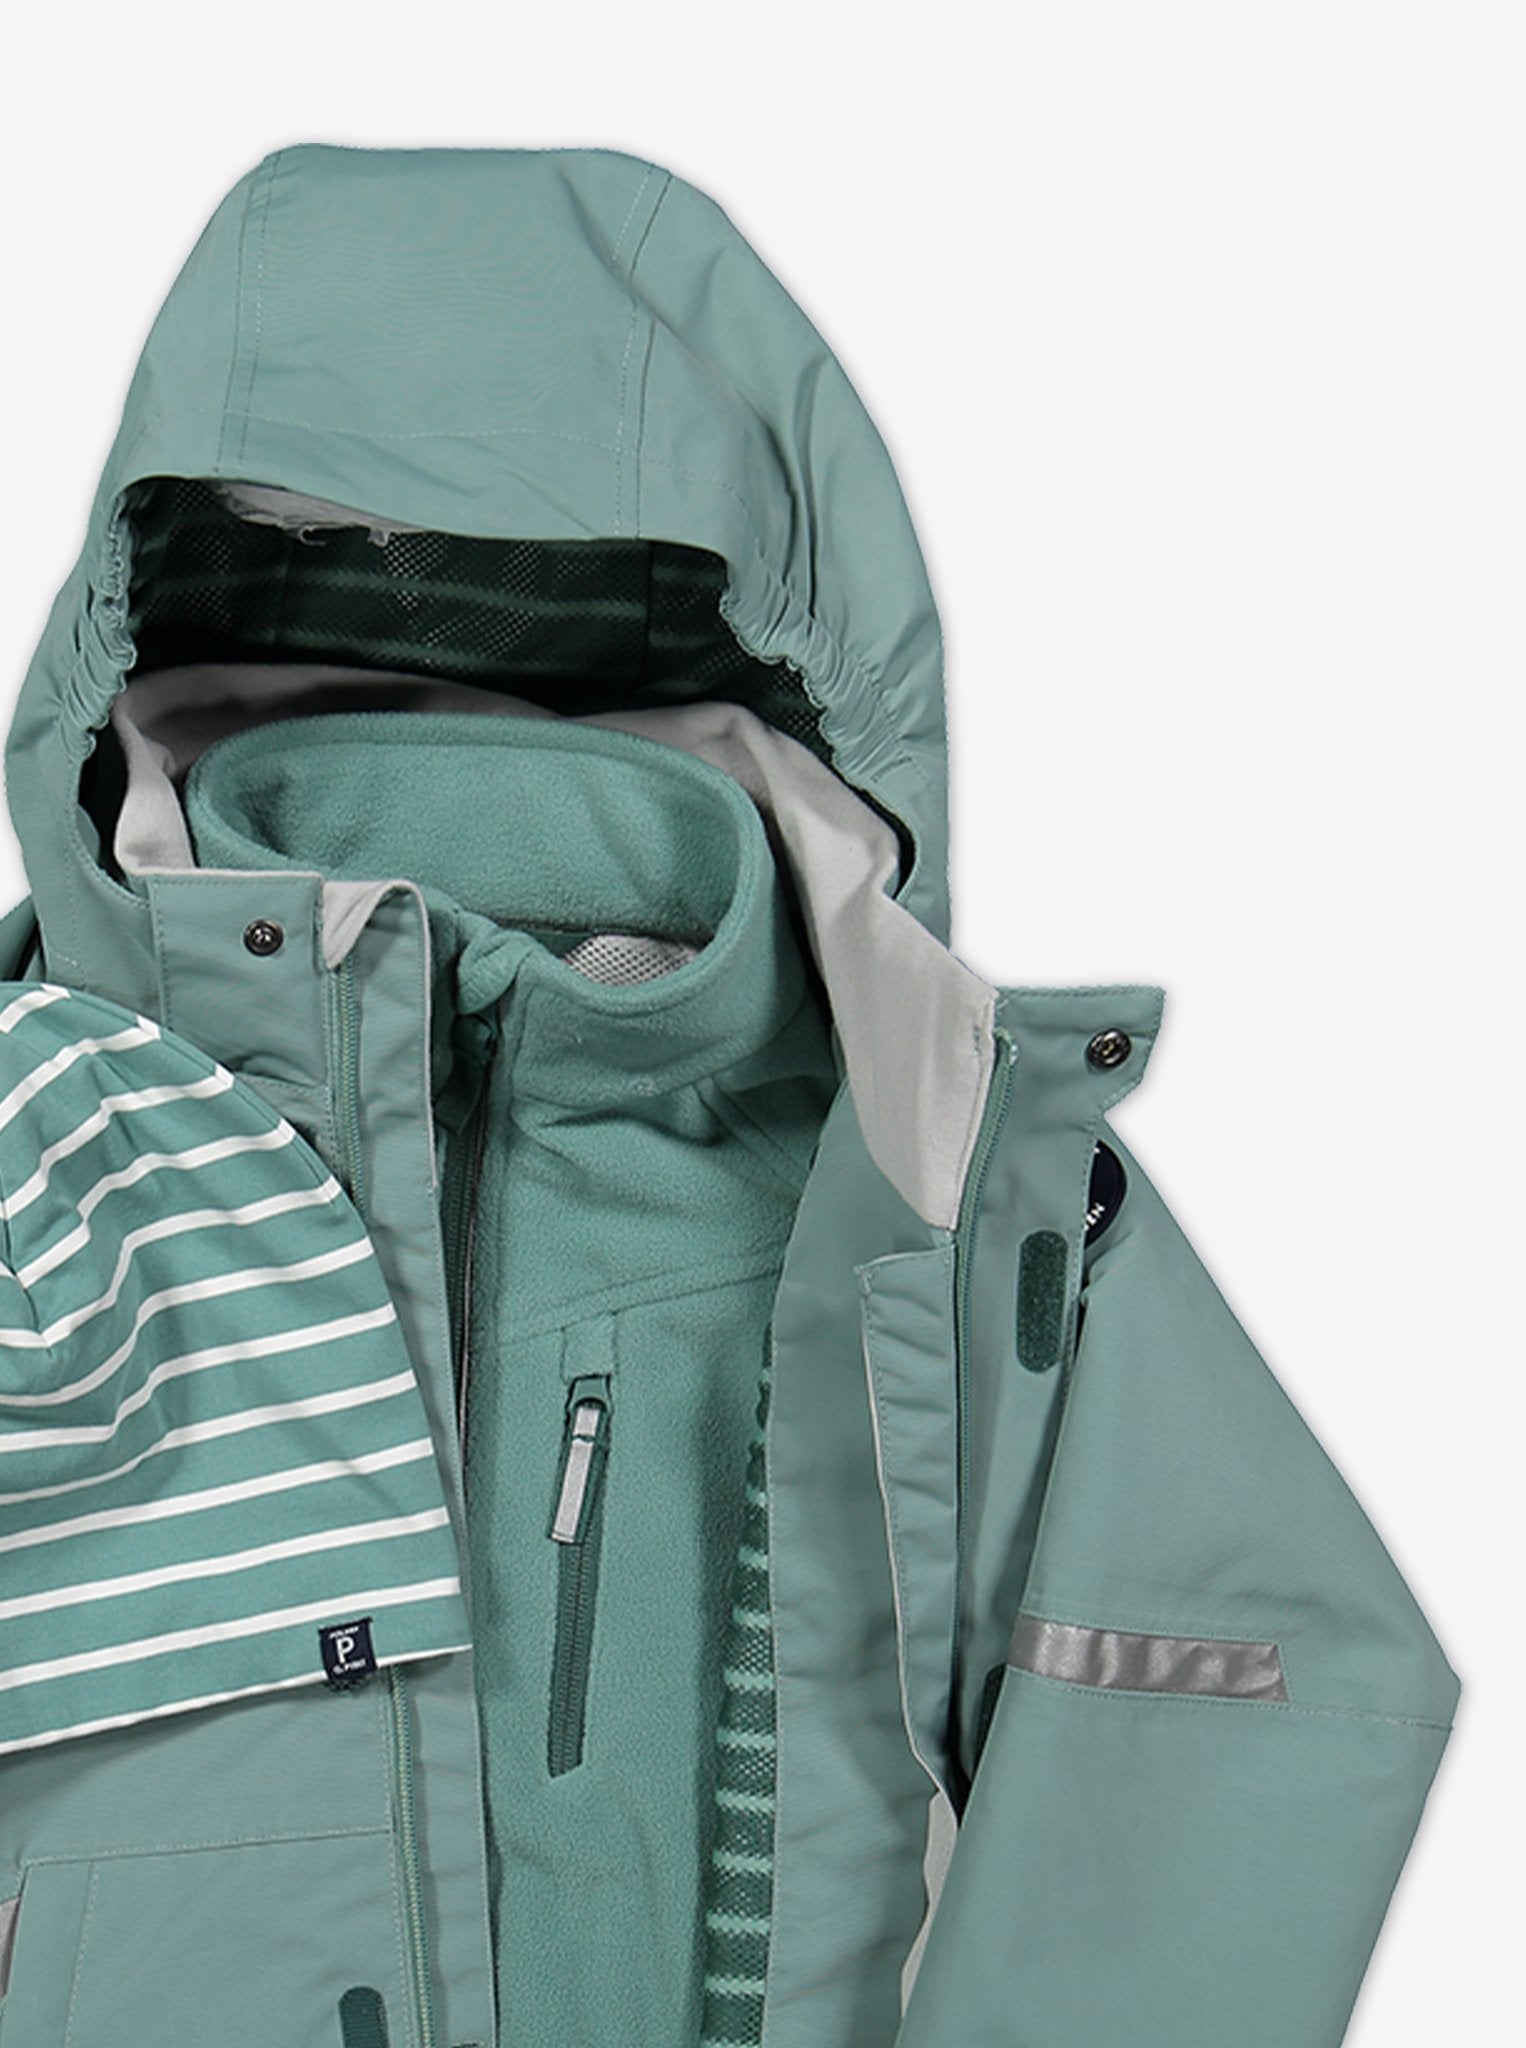 A close up shot of kids waterproof jacket made of shell fabric paired with kids waterproof fleece jacket, in colour green.